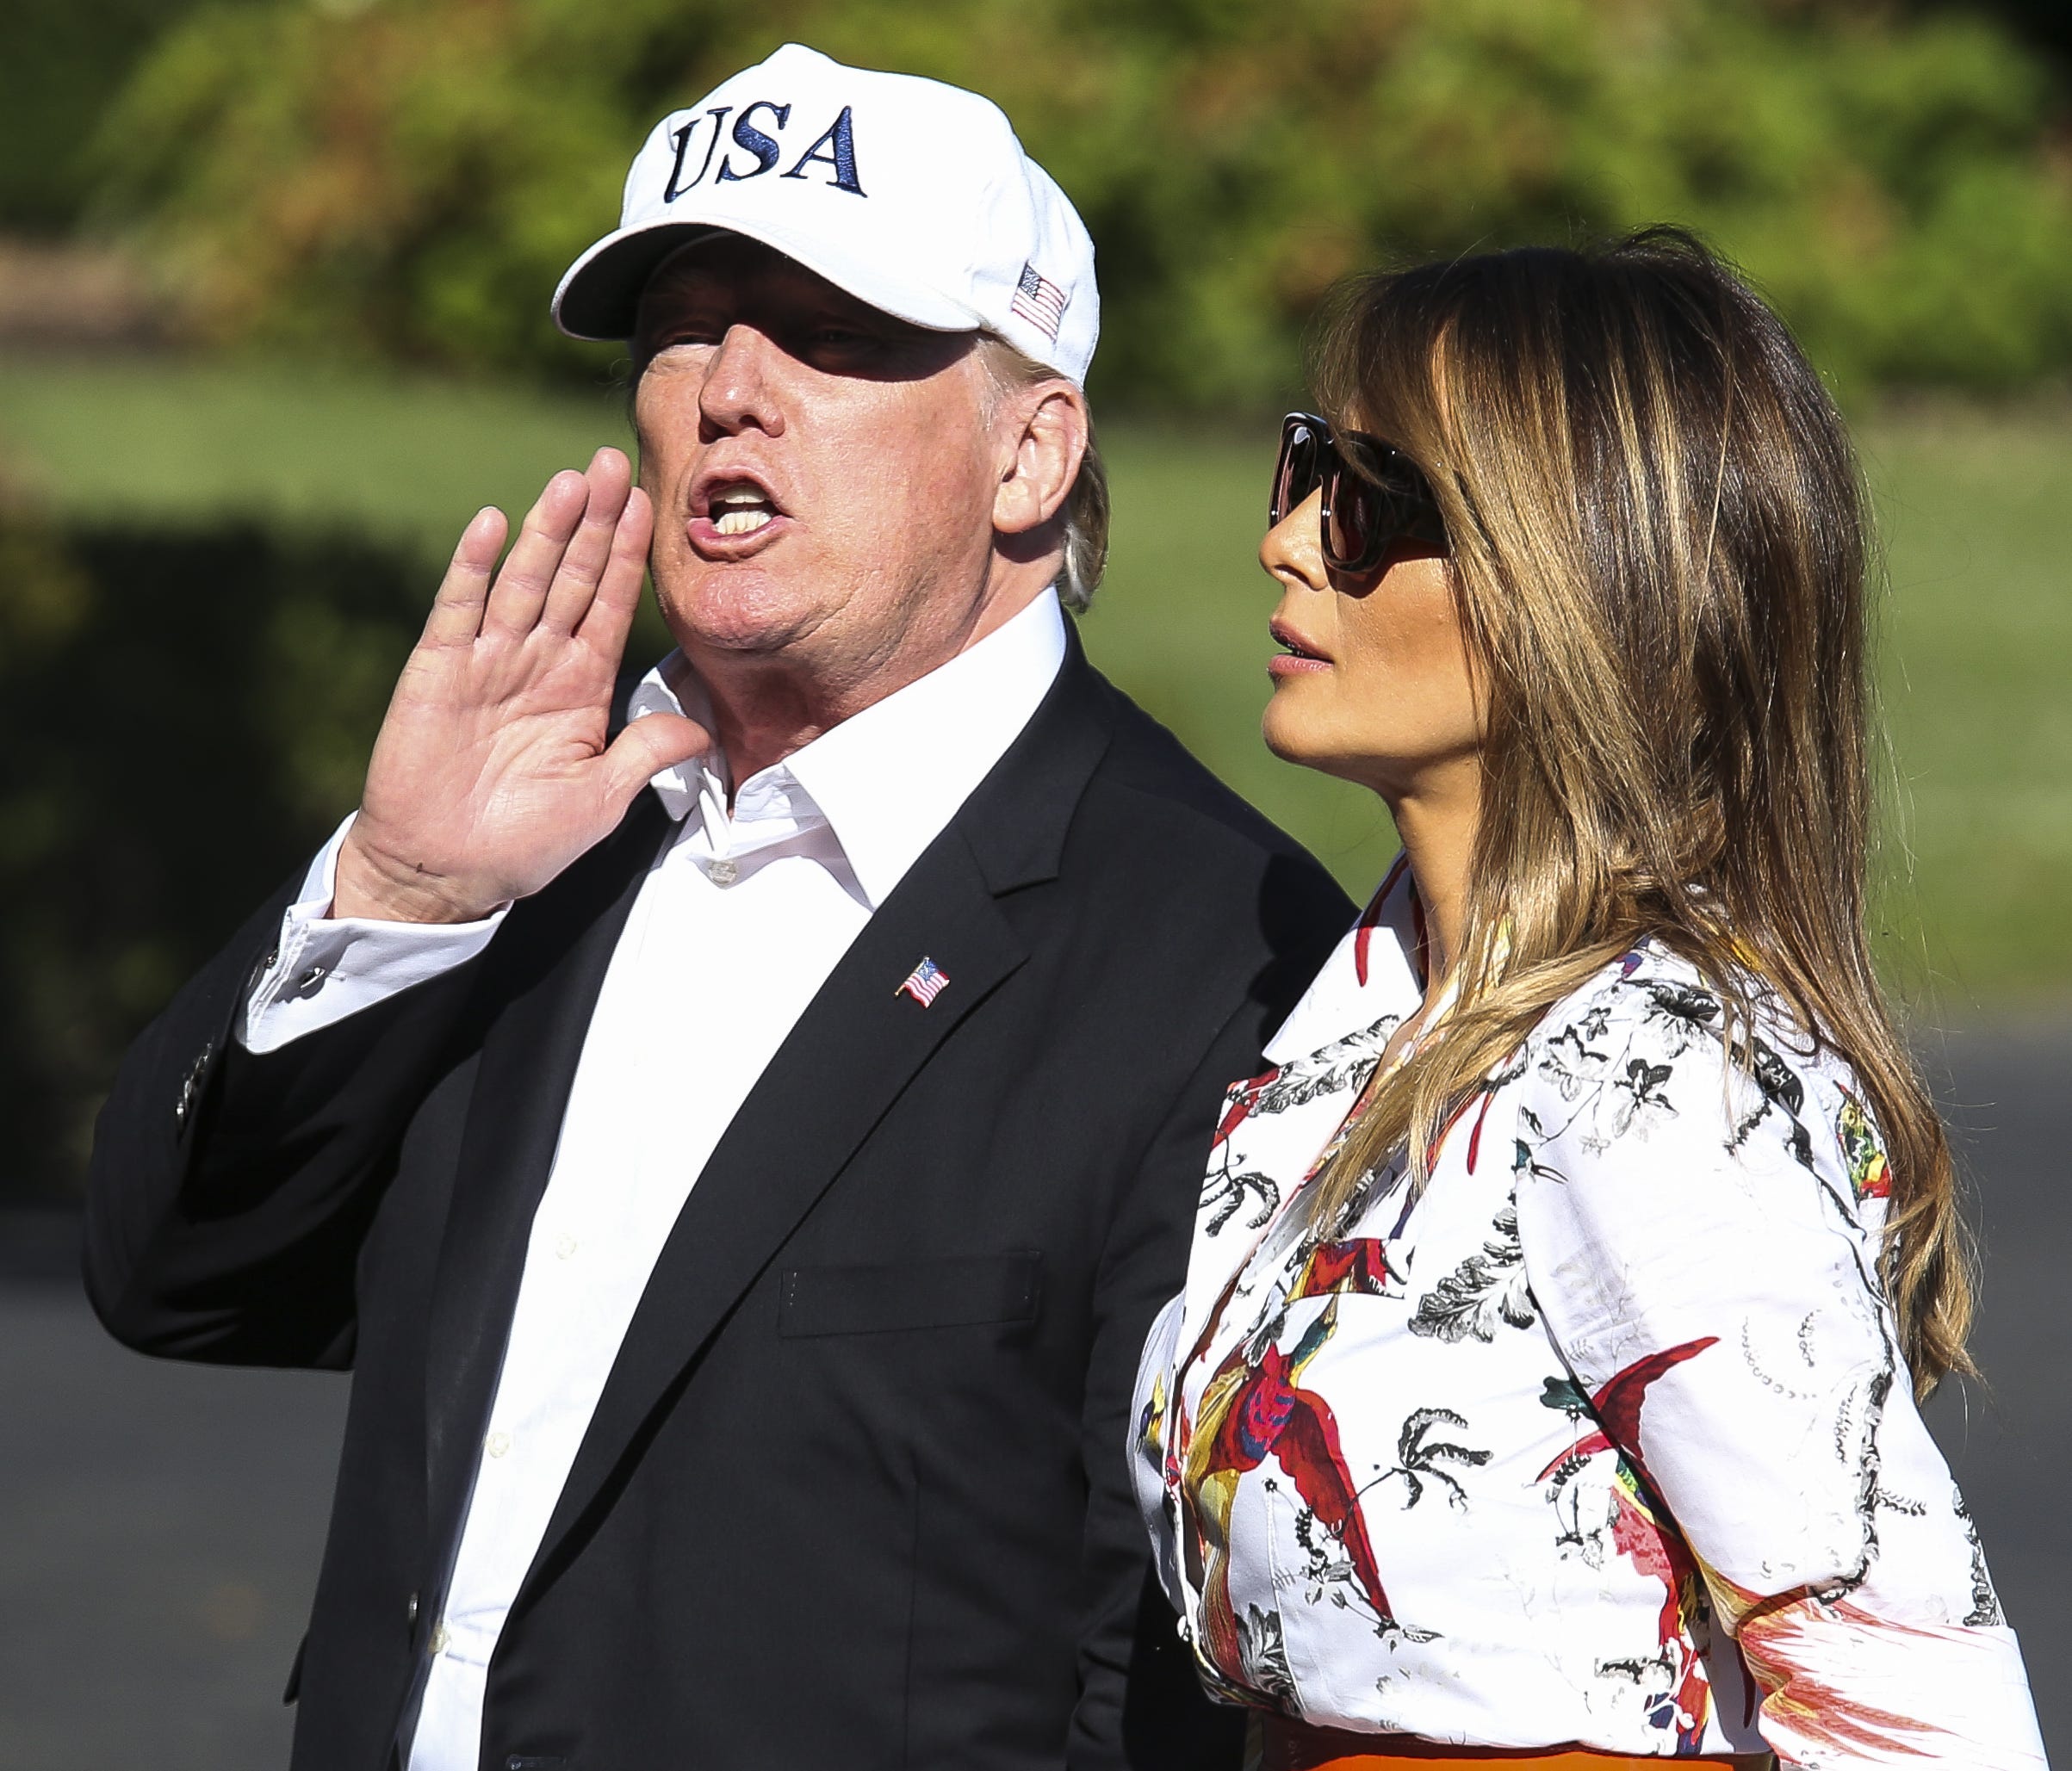 President Donald Trump and first lady Melania Trump cross the South Lawn upon arrival at the White House on July 8, 2018 in Washington, D.C.